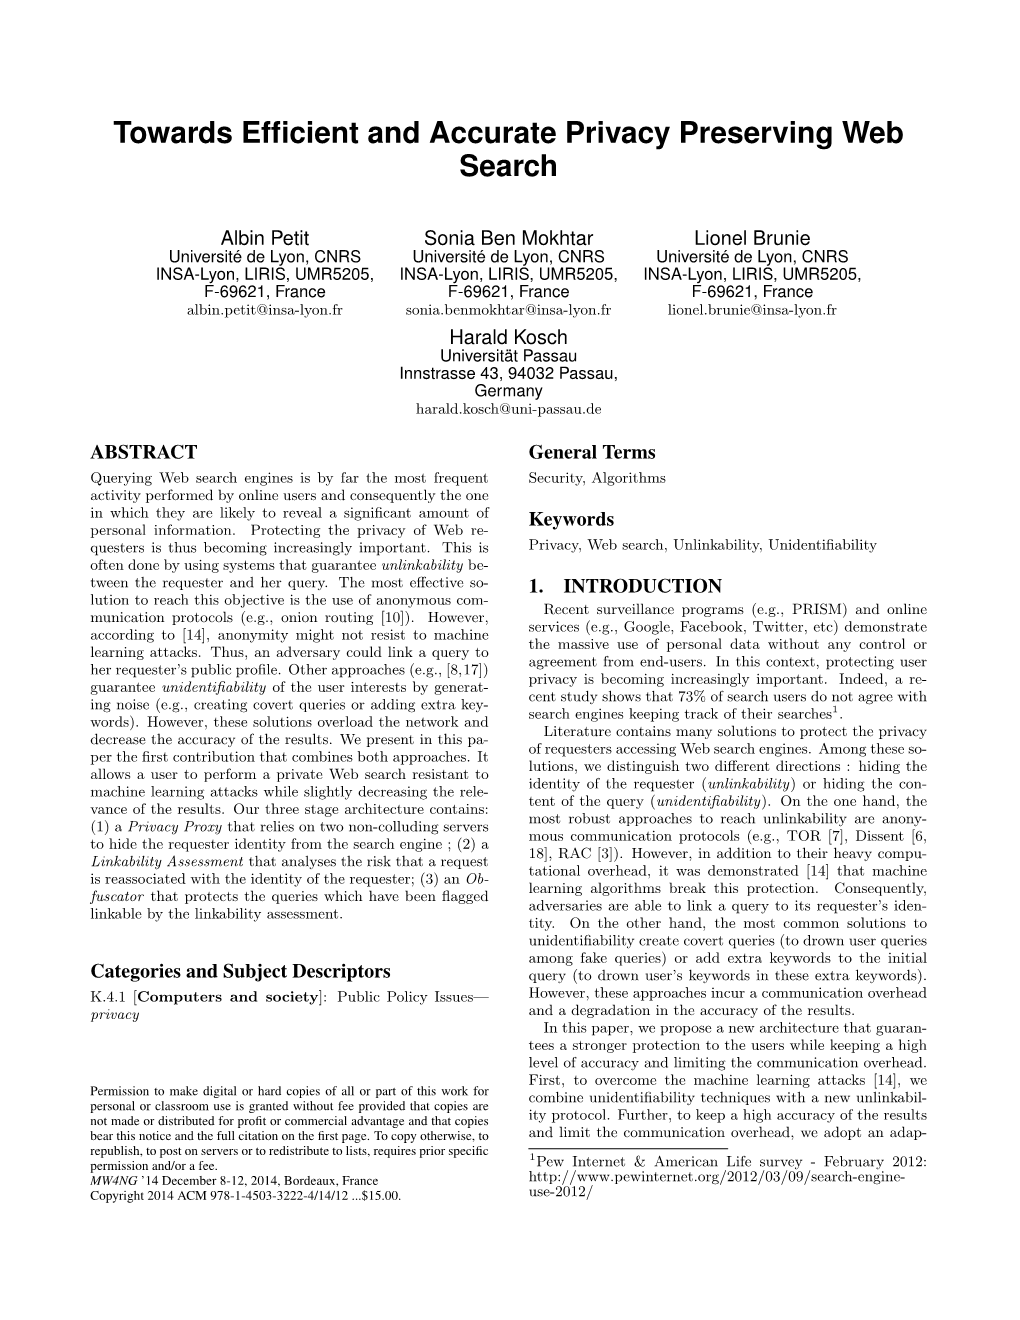 Towards Efficient and Accurate Privacy Preserving Web Search